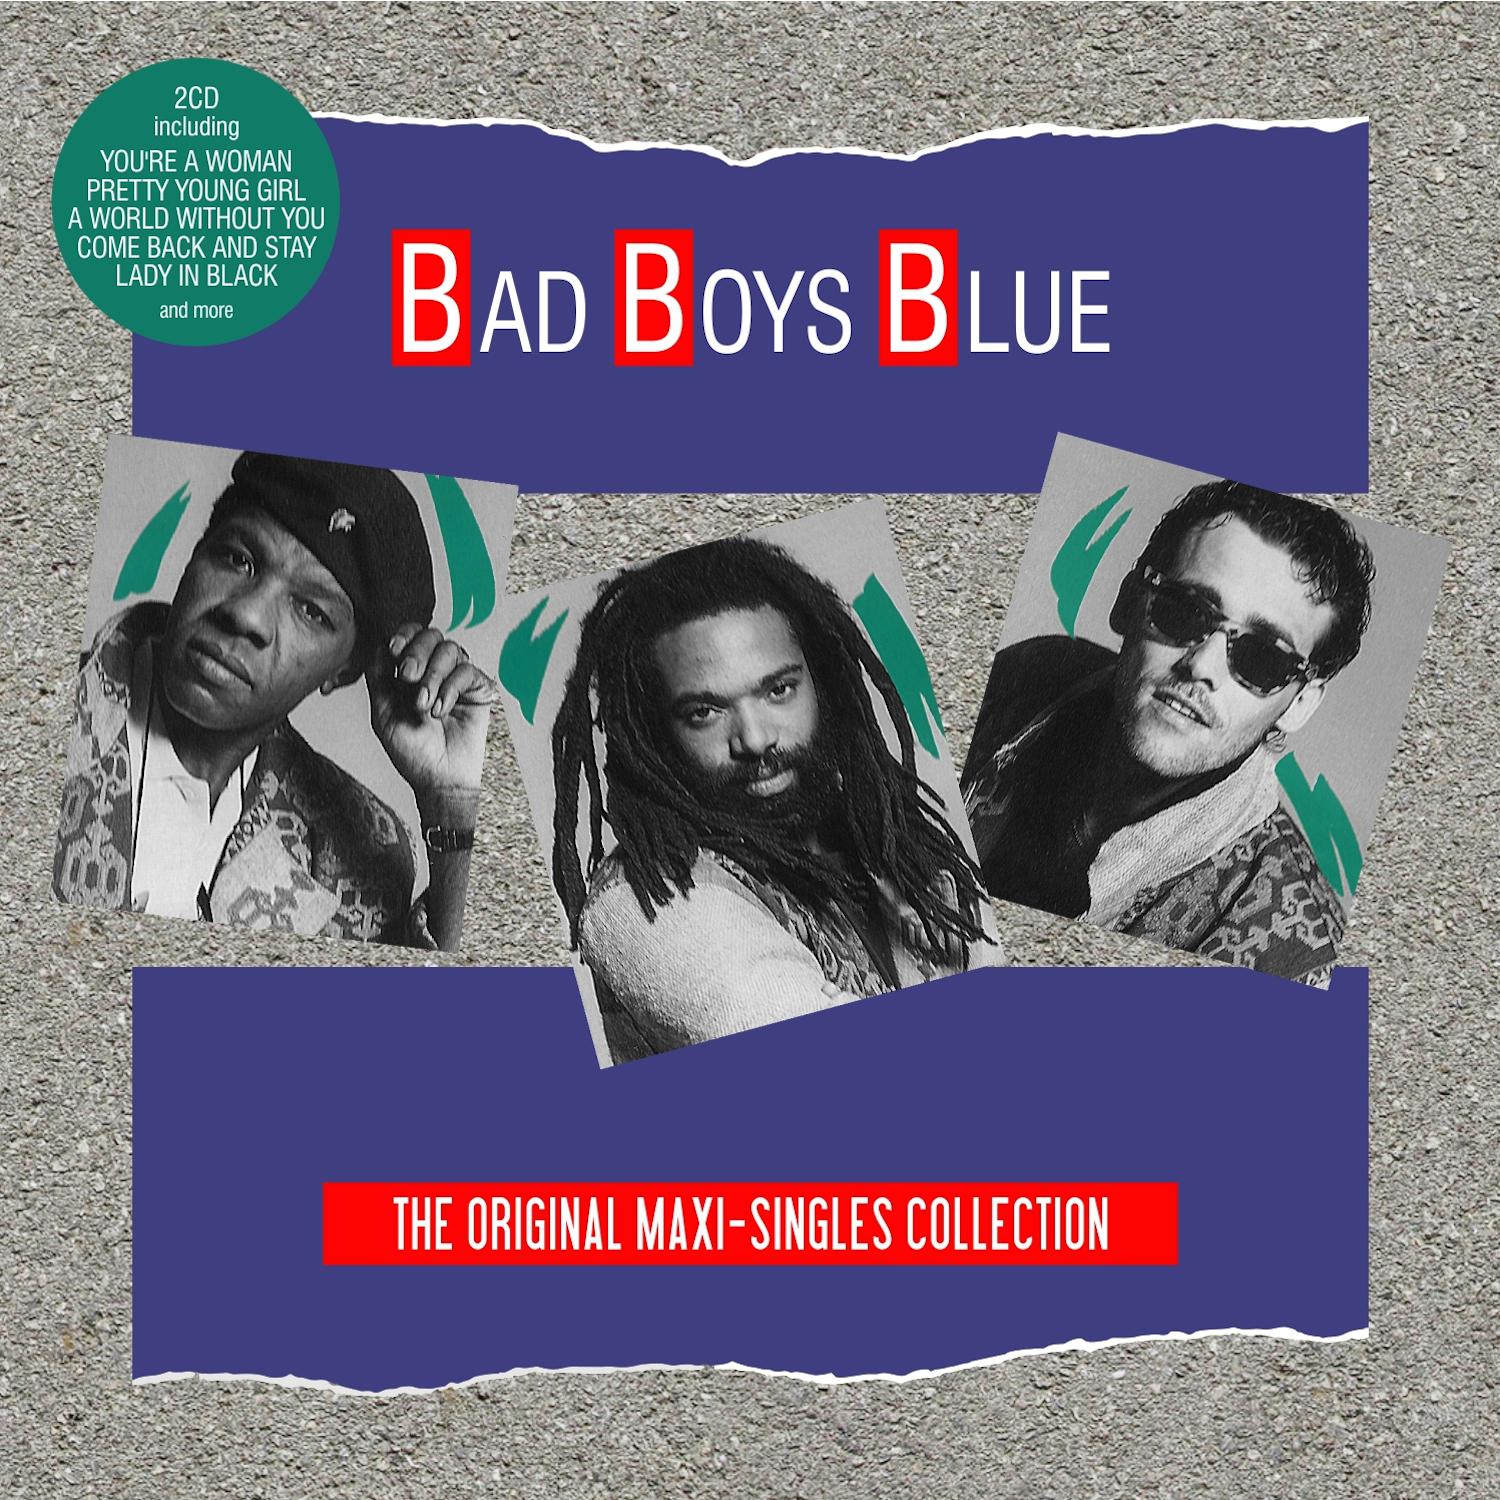 Bad Boys Blue - Come Back and Stay (Audio Classic Mix)